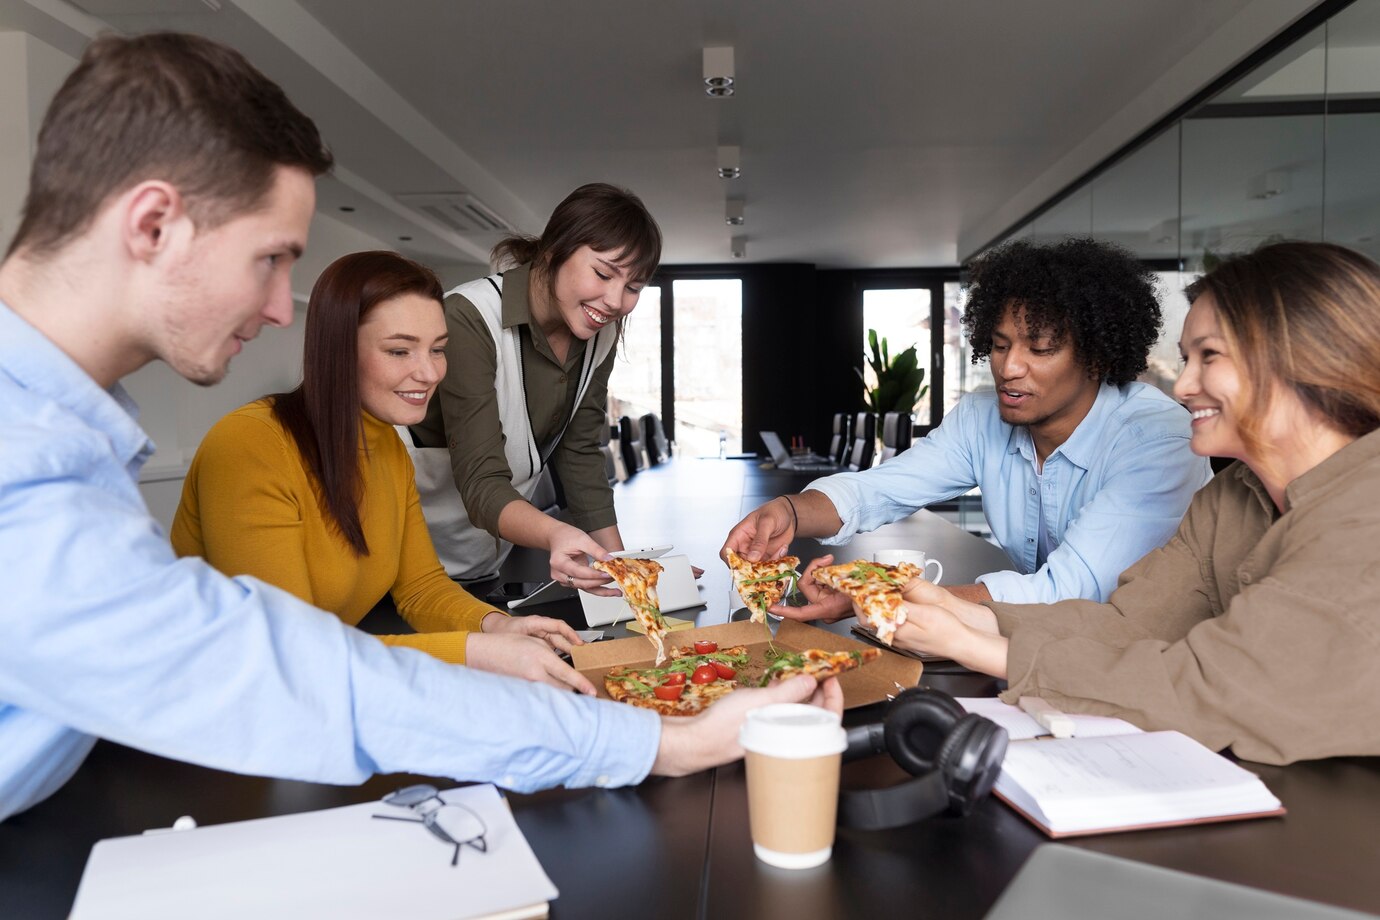 Top 10 Office Catering Companies in the UK